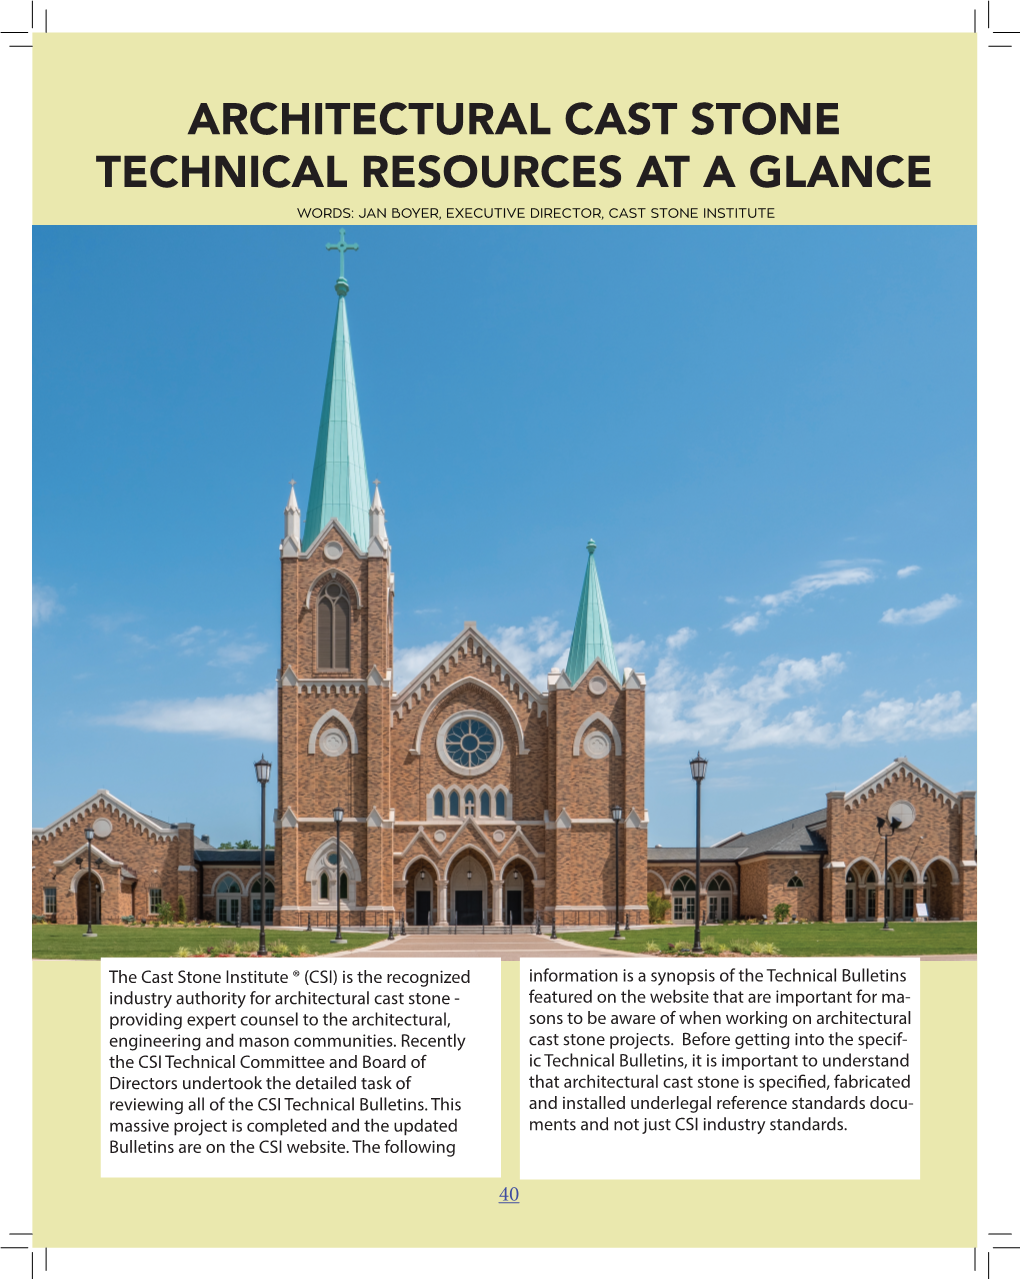 Architectural Cast Stone Technical Resources at a Glance Words: Jan Boyer, Executive Director, Cast Stone Institute